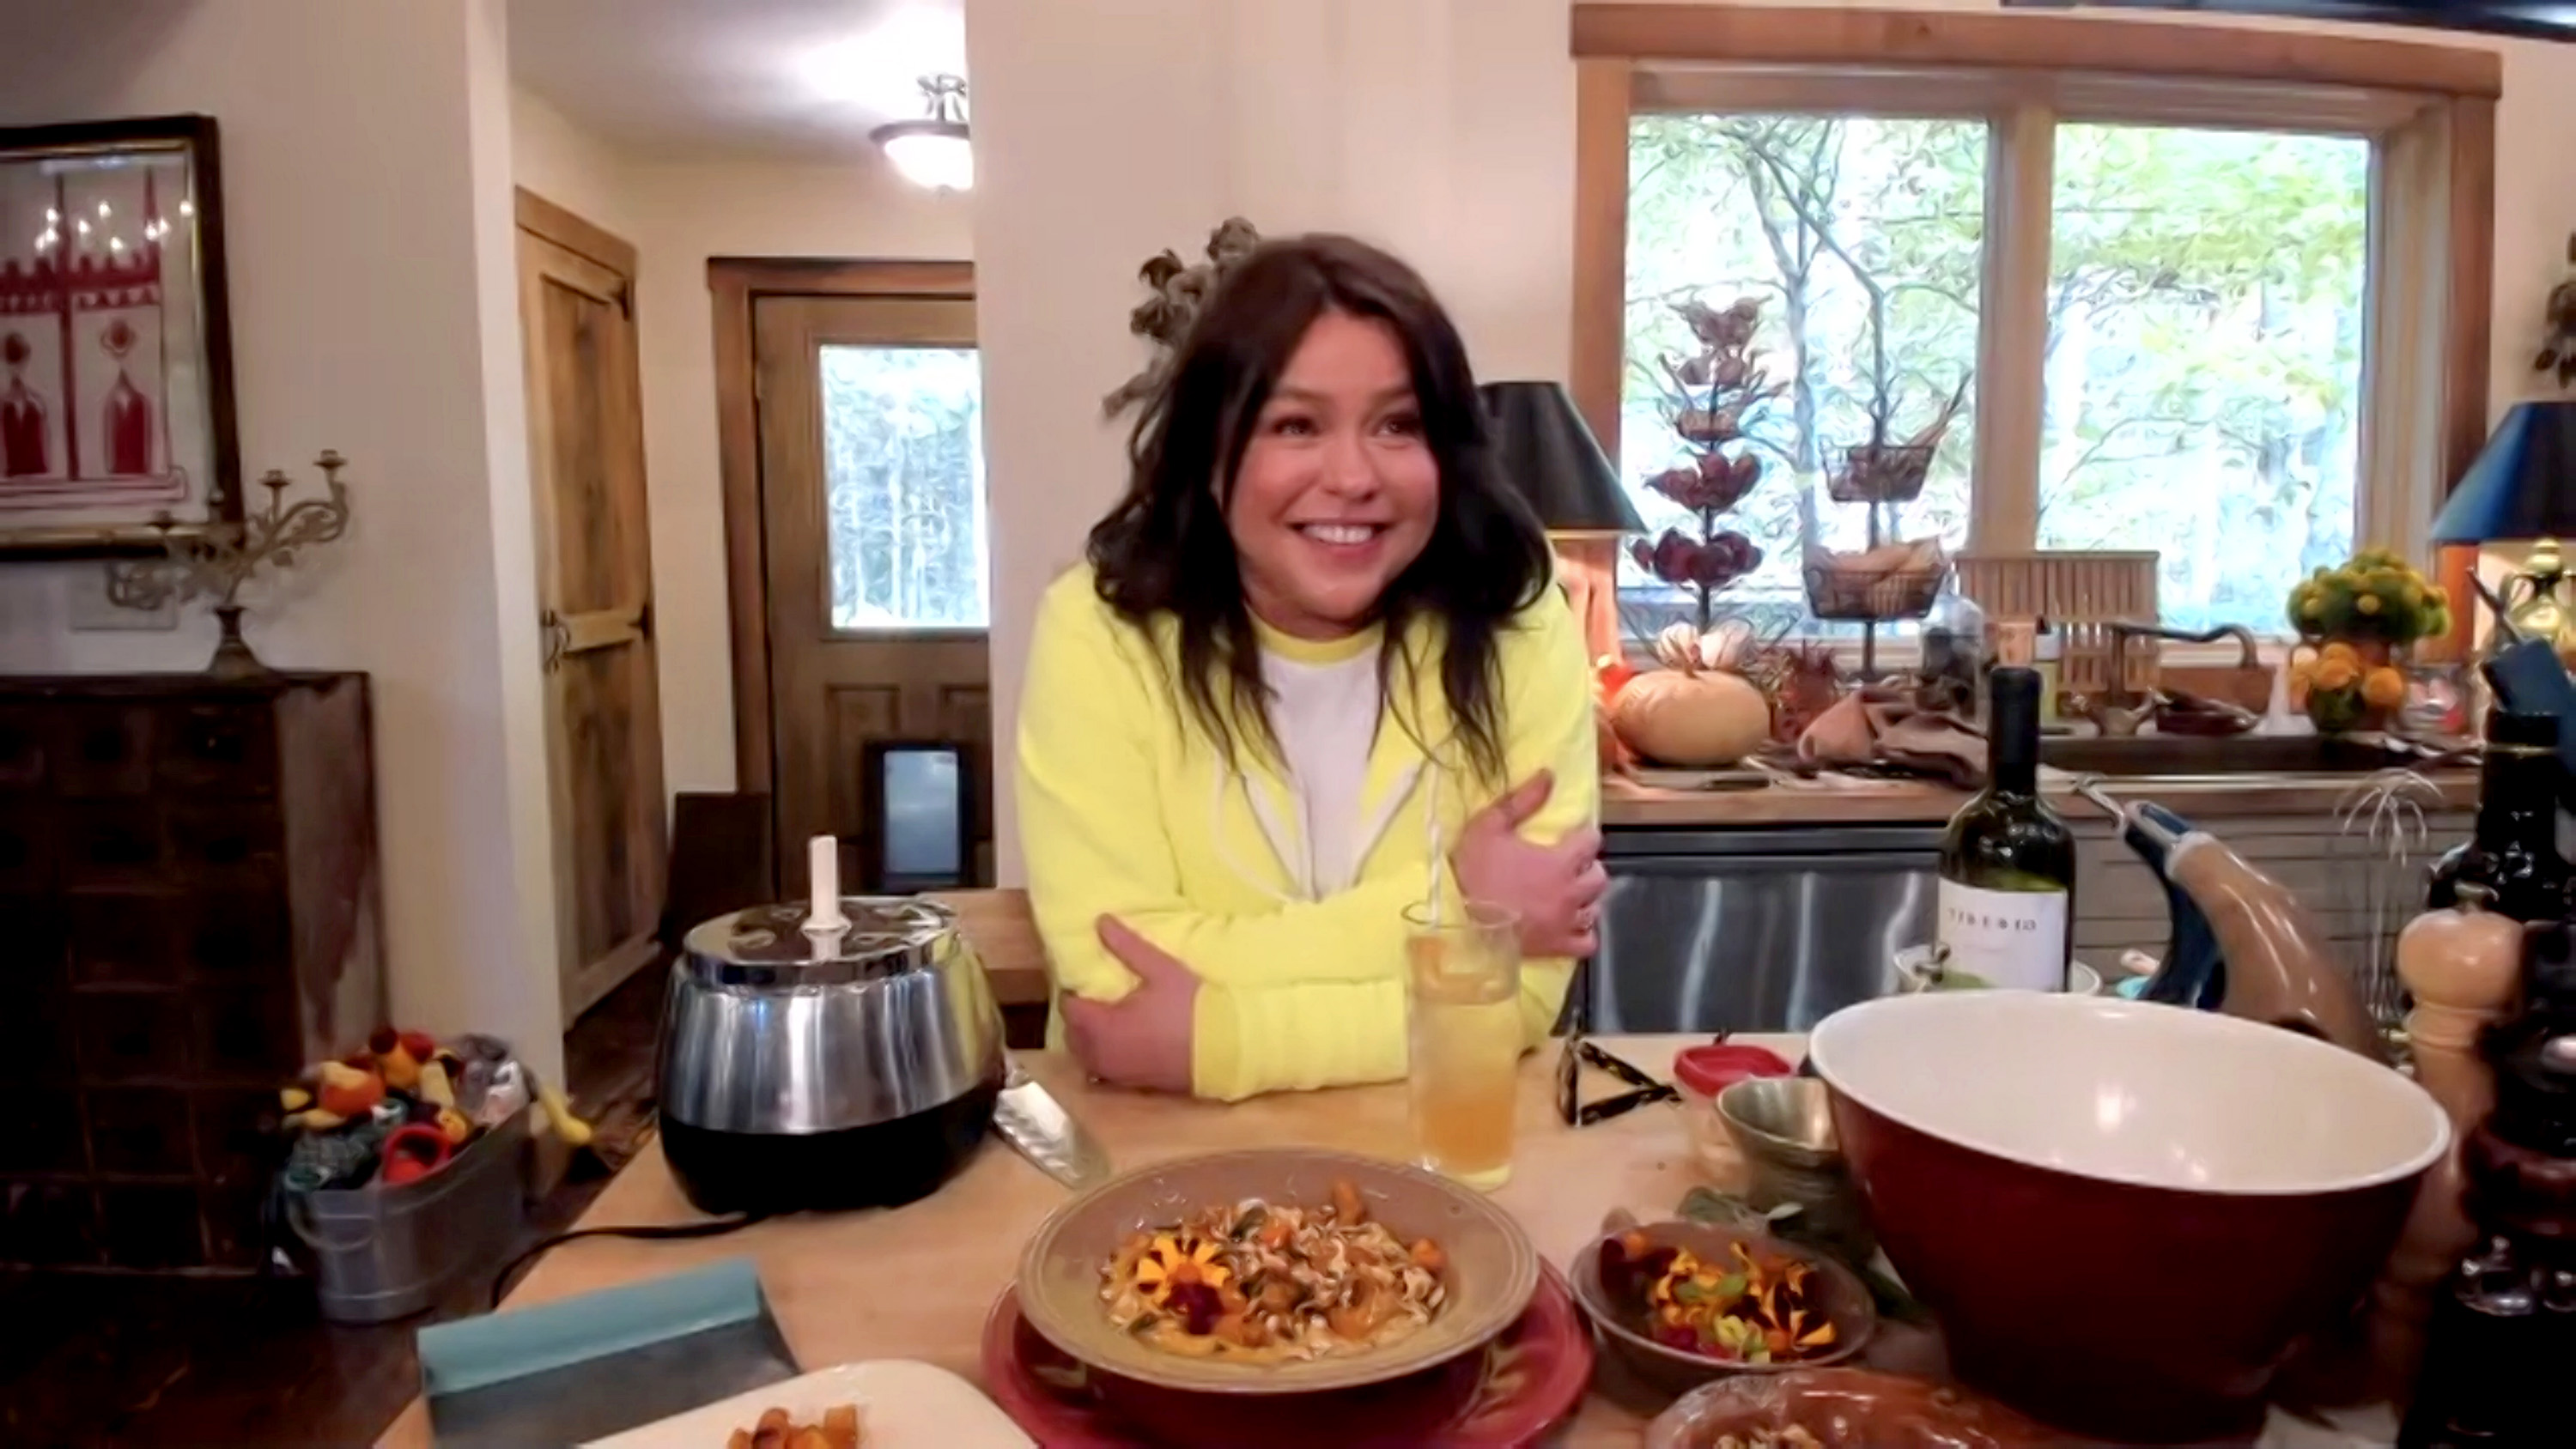 Celebrity chef Rachael Ray wears a yellow cardigan in this photograph.